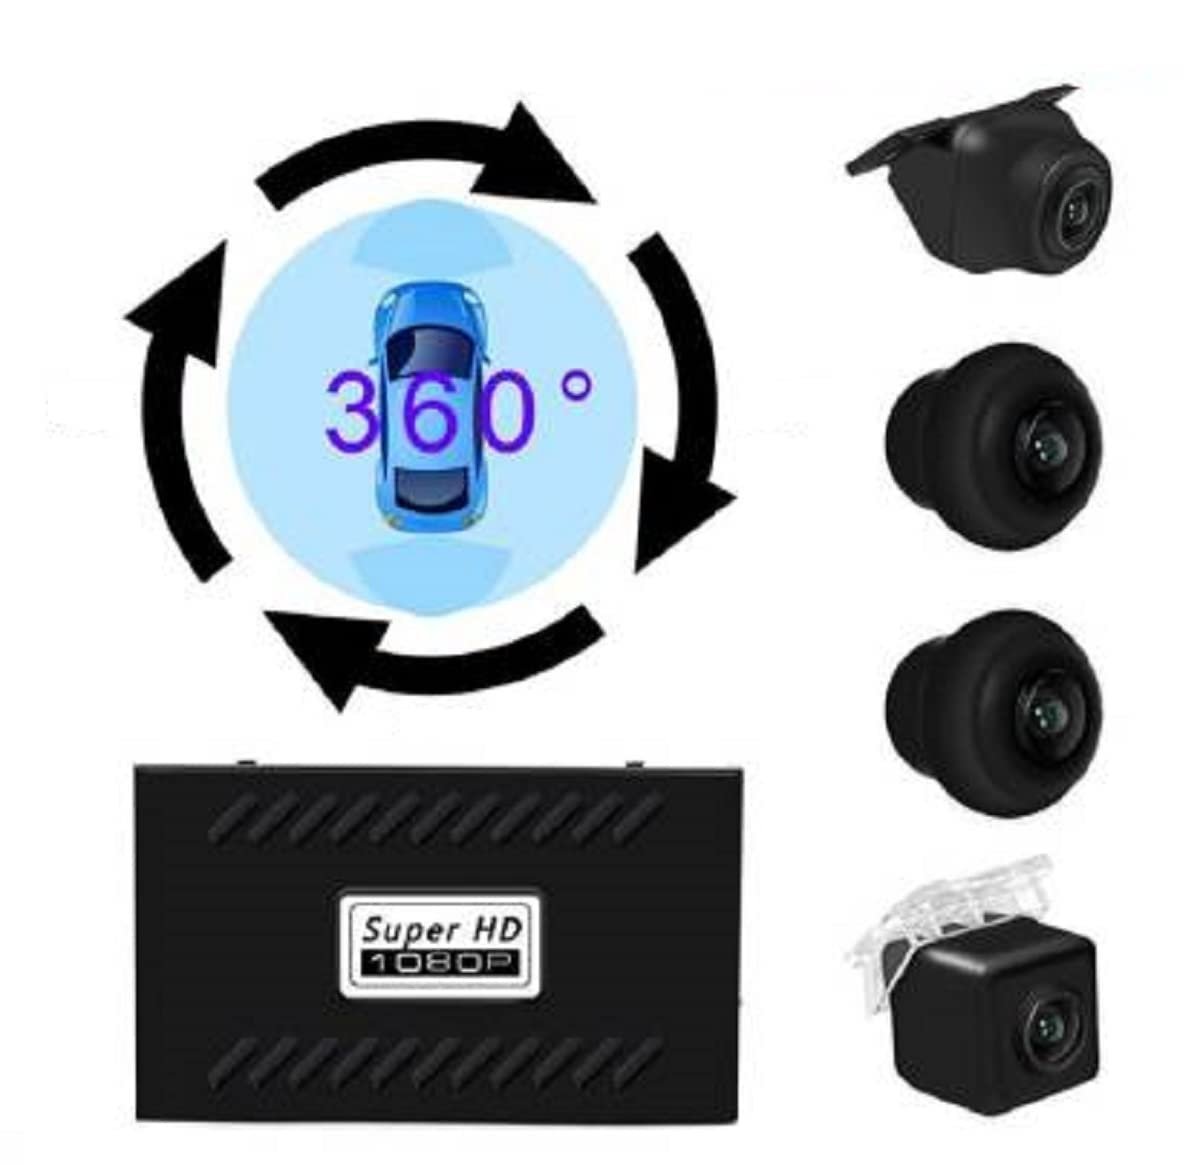 Panoramic Rearview Camera 360 Degree Parking System Auto Car Camera All Round Waterproof Image 